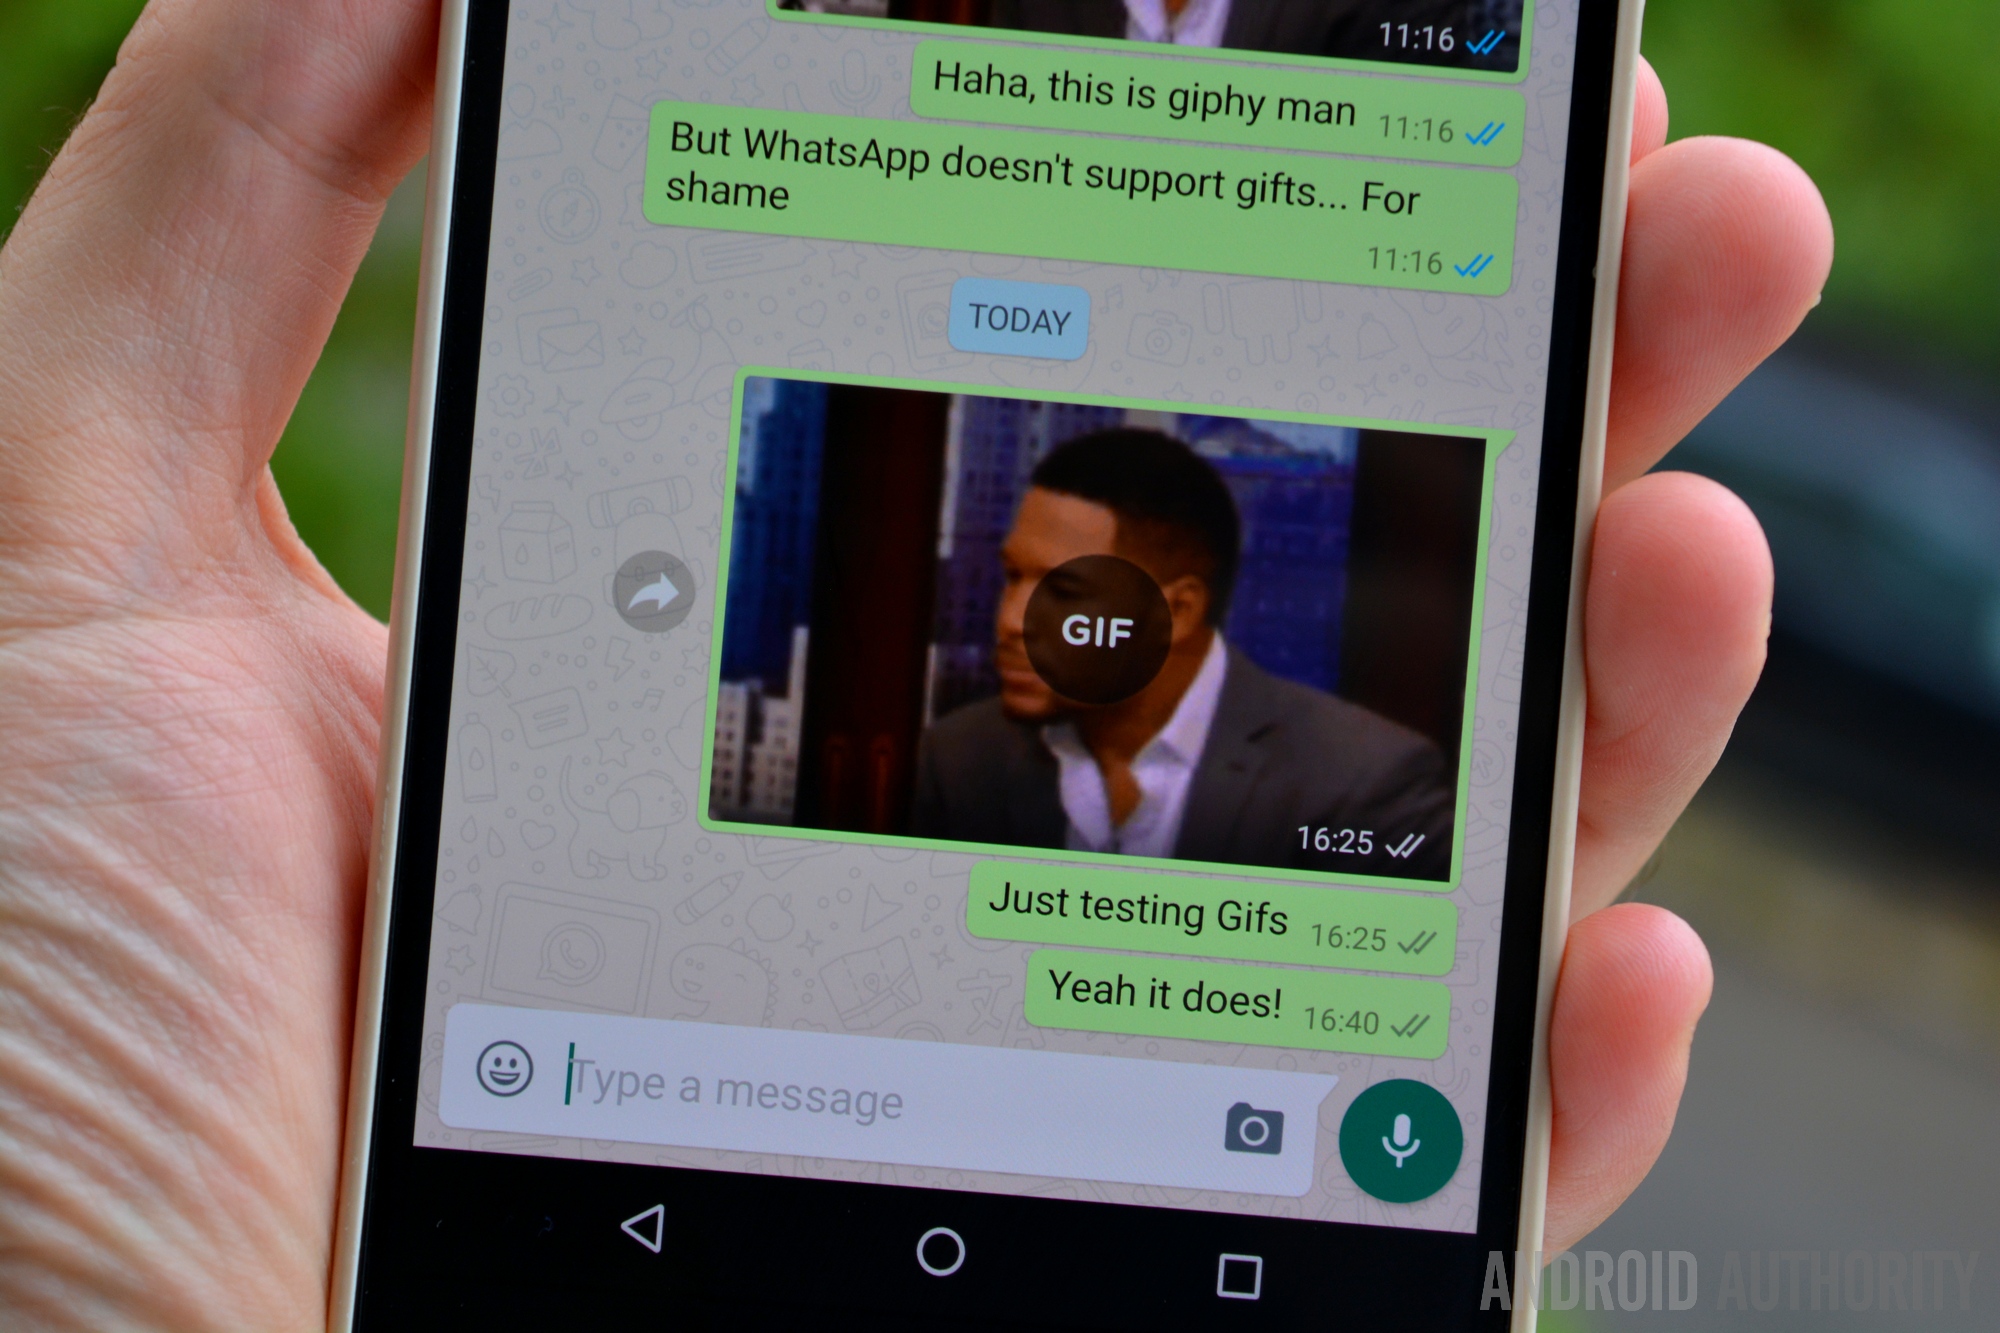 How to use gifs on WhatsApp